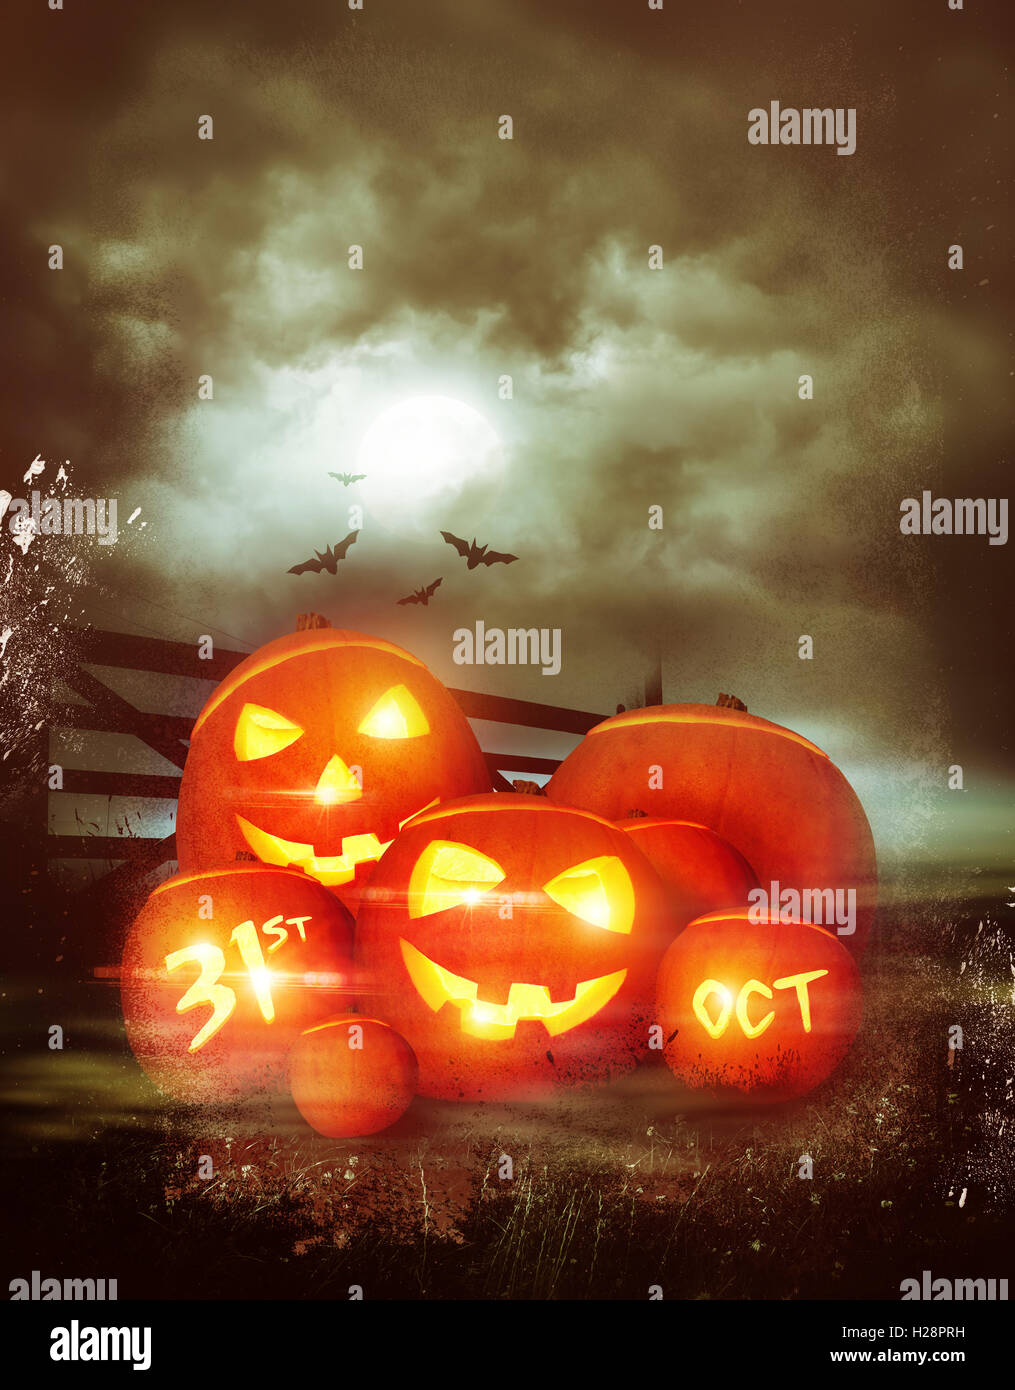 Vintage Happy Halloween background decorated with pumpkins! Illustration. Stock Photo